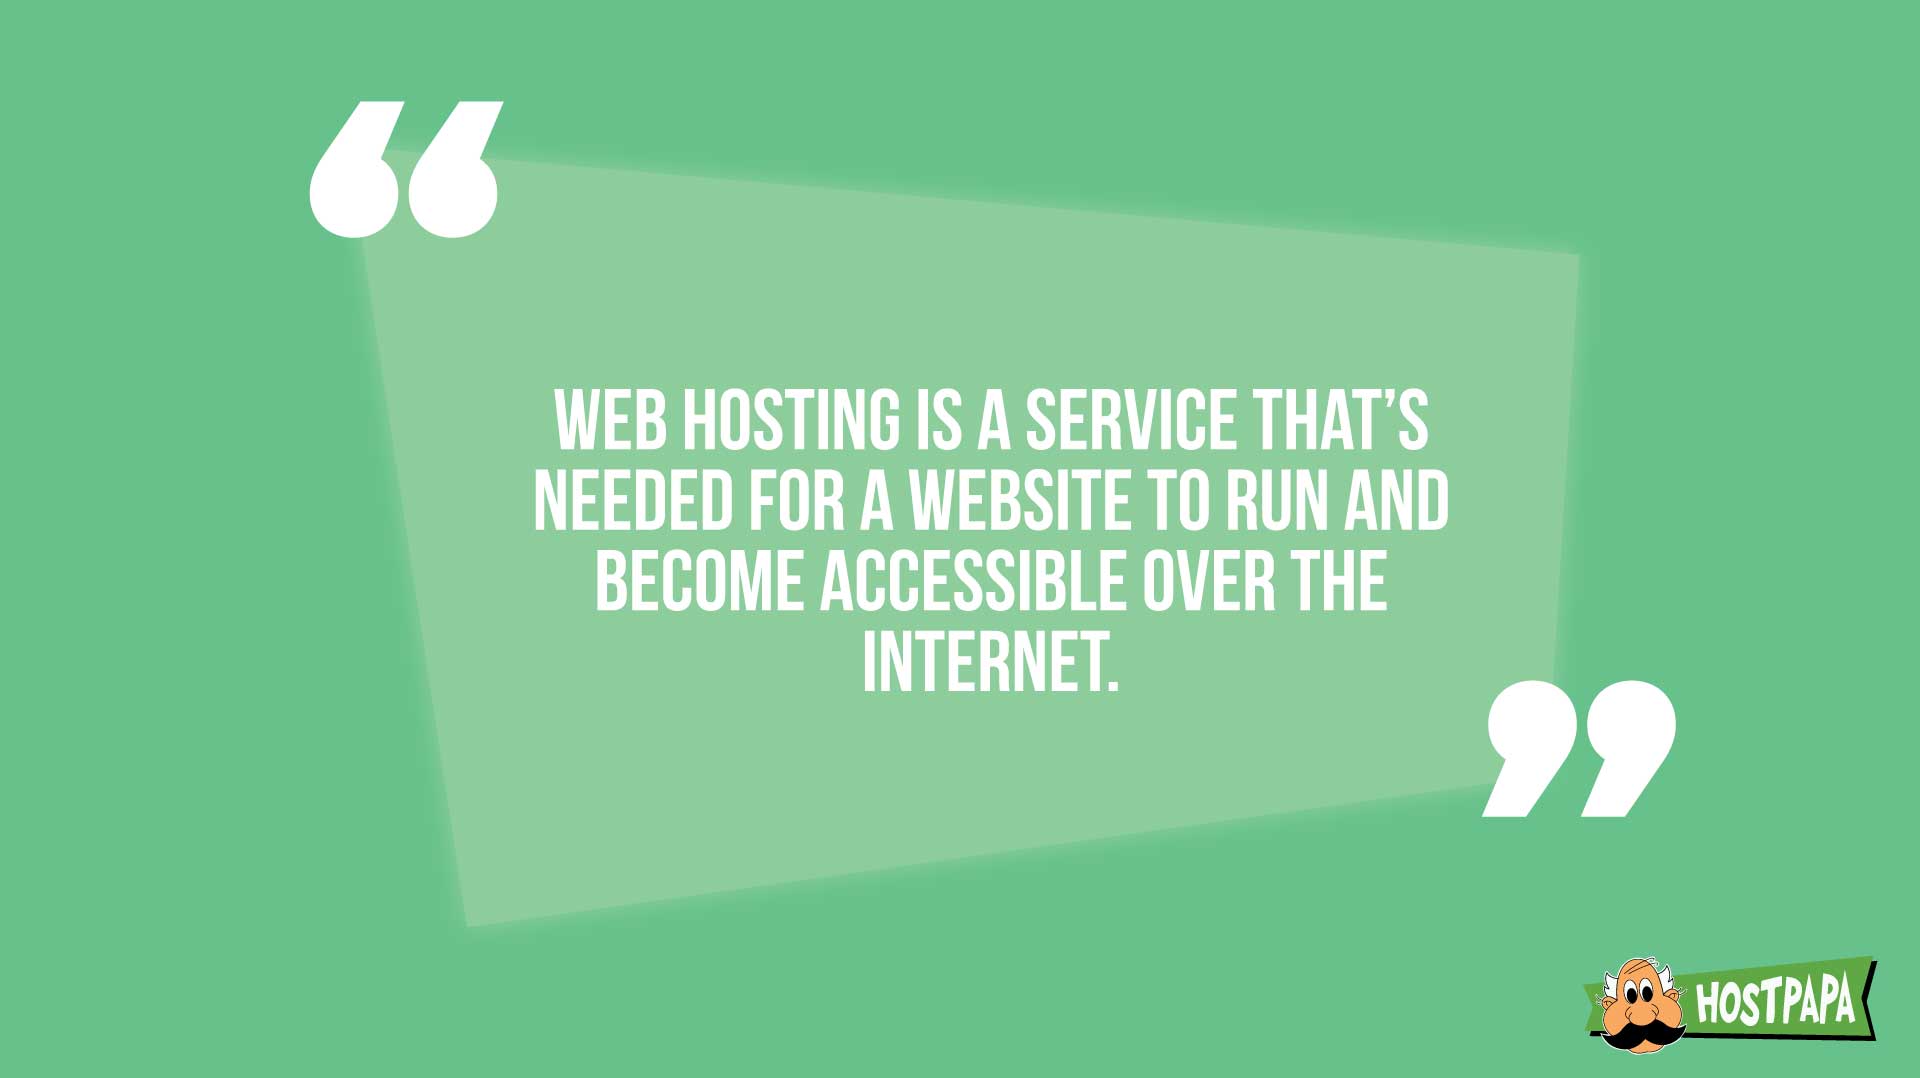 Web hosting is a service that's needed for a website to run and become accessible over the internet. 